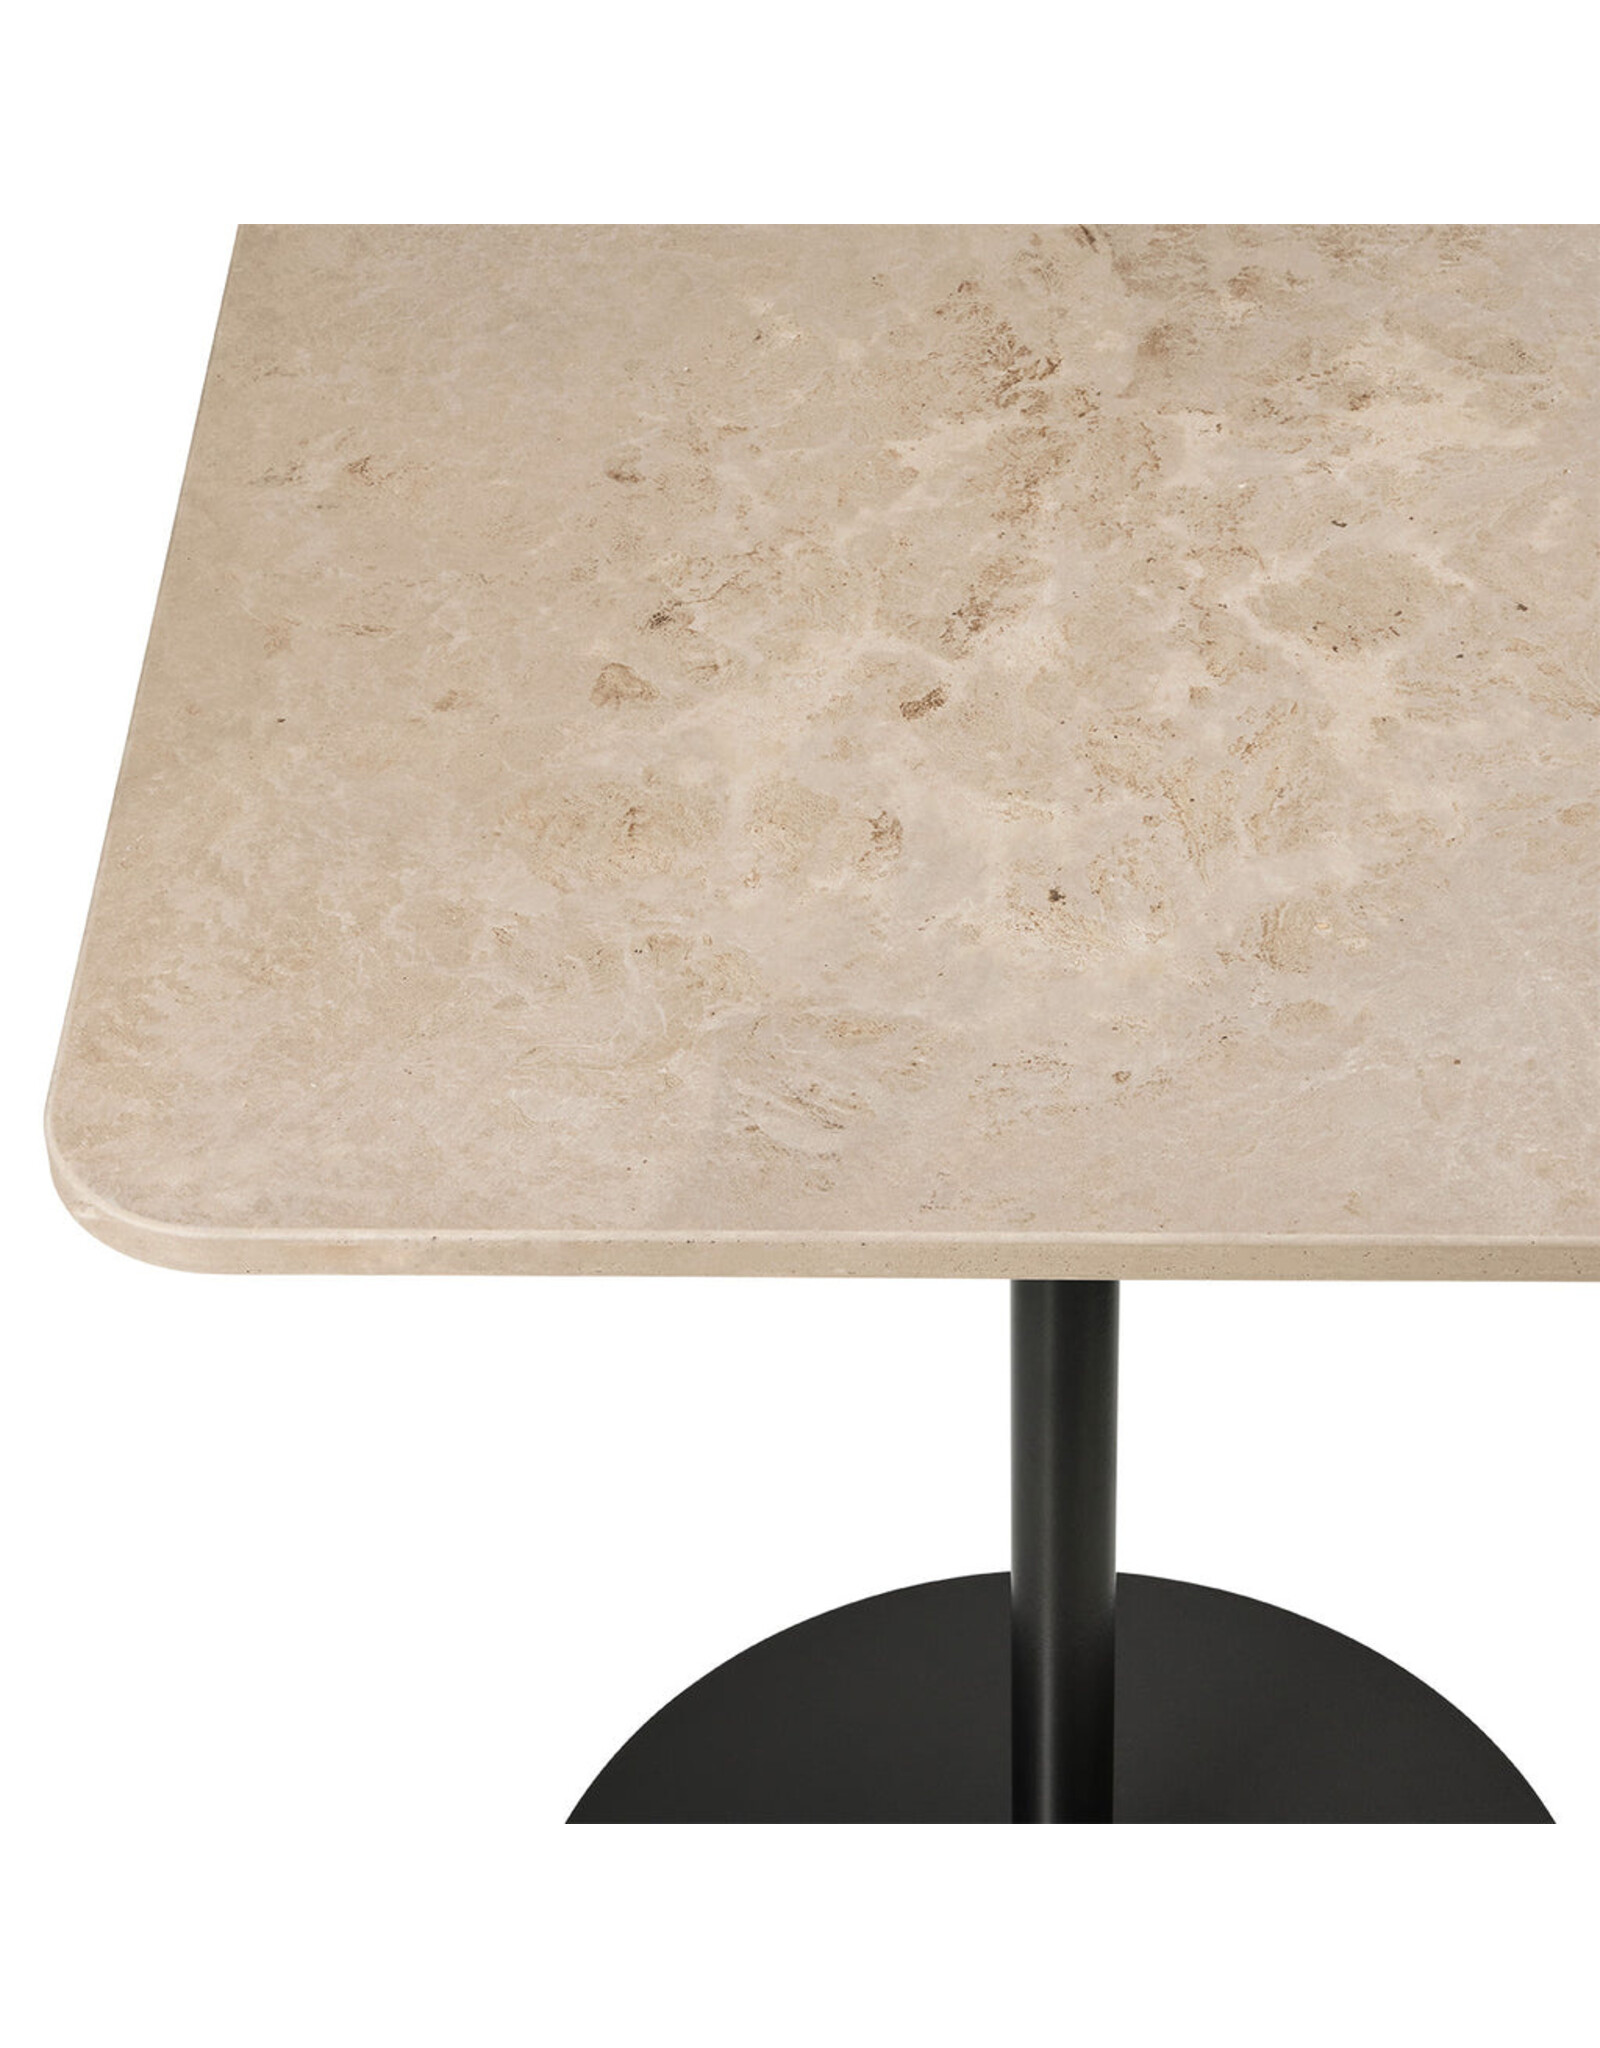 MATER CAFE TABLE, COFFEE WASTE LIGHT TABLE TOP